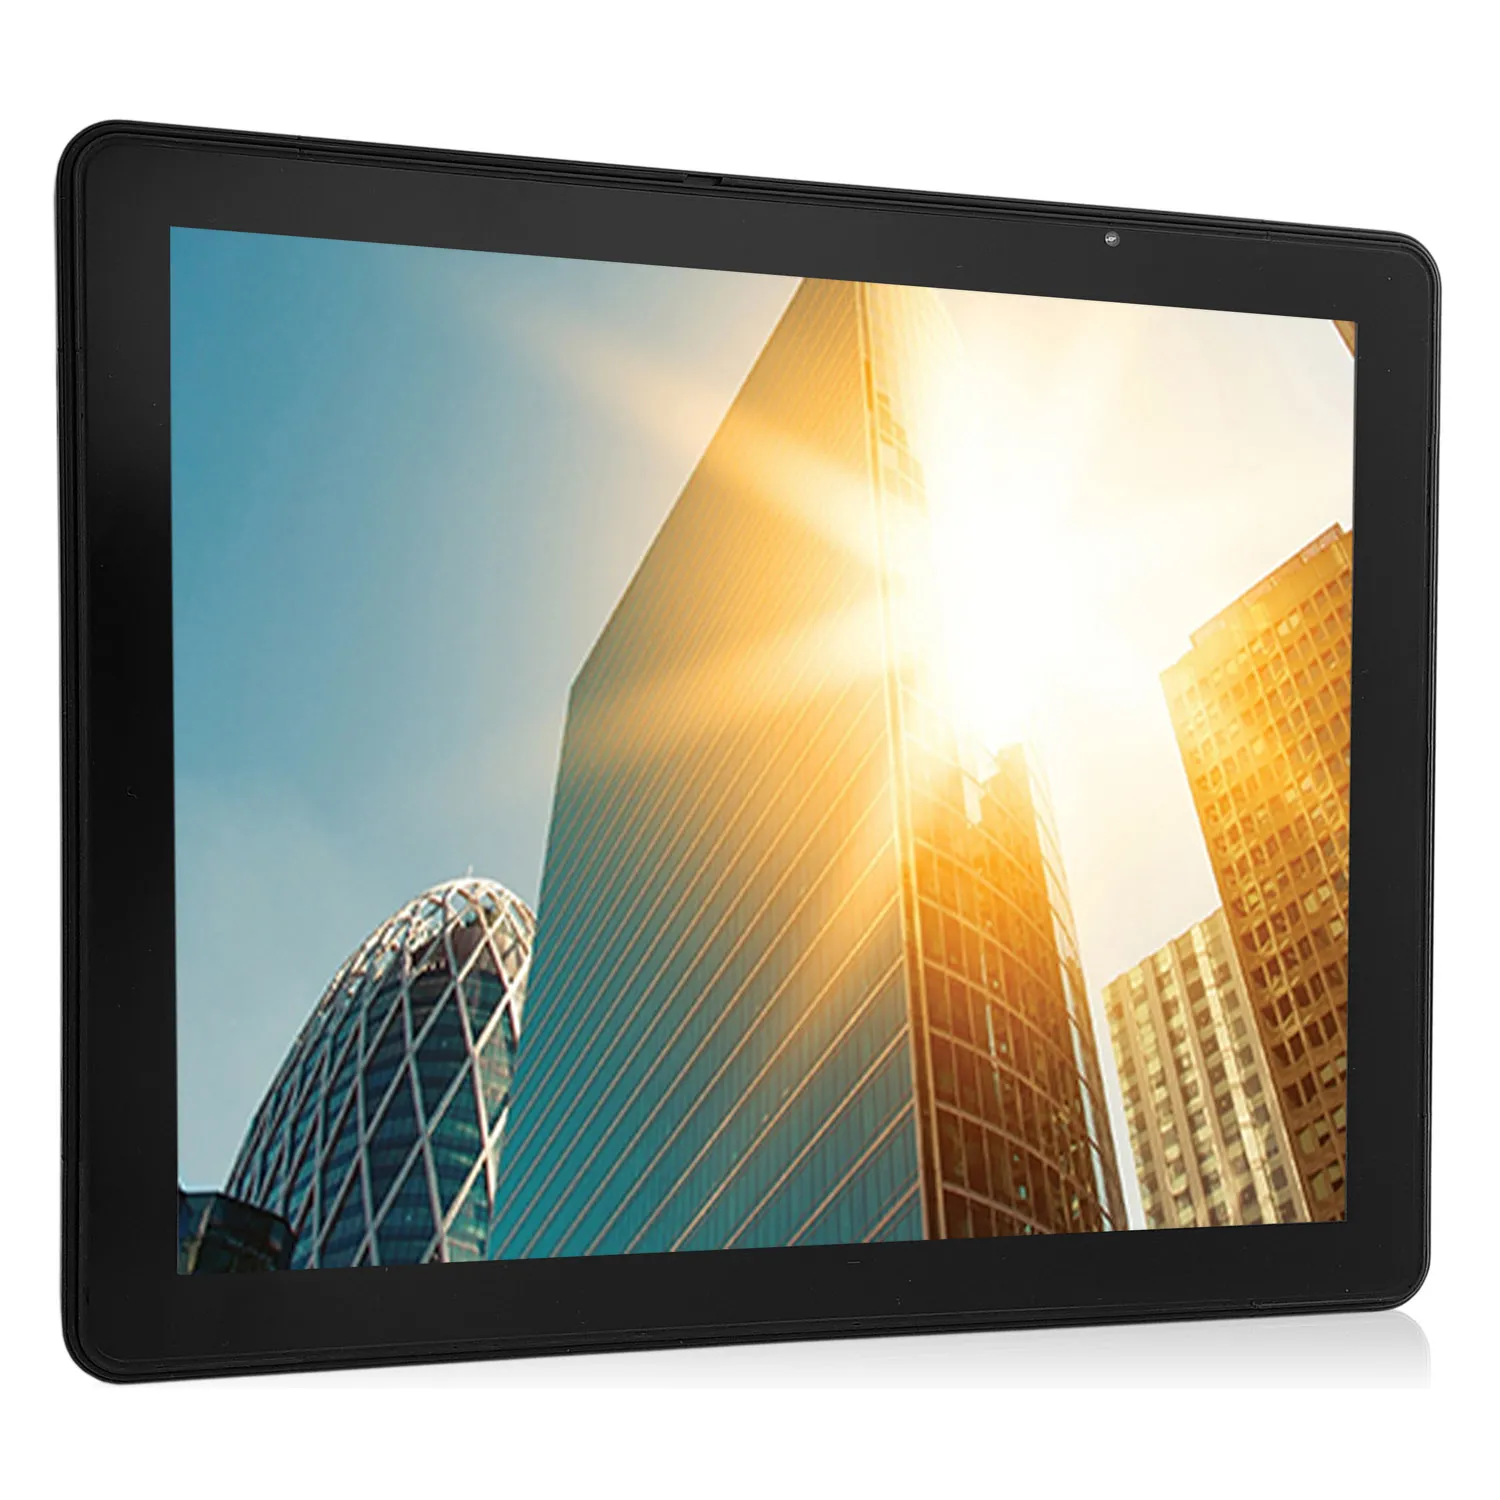 Industrial Open Frame High Bright Touch Monitor Keetouch GmbH 15’’ KOT-0150U-CA4PH KT-150-CHWSGM1